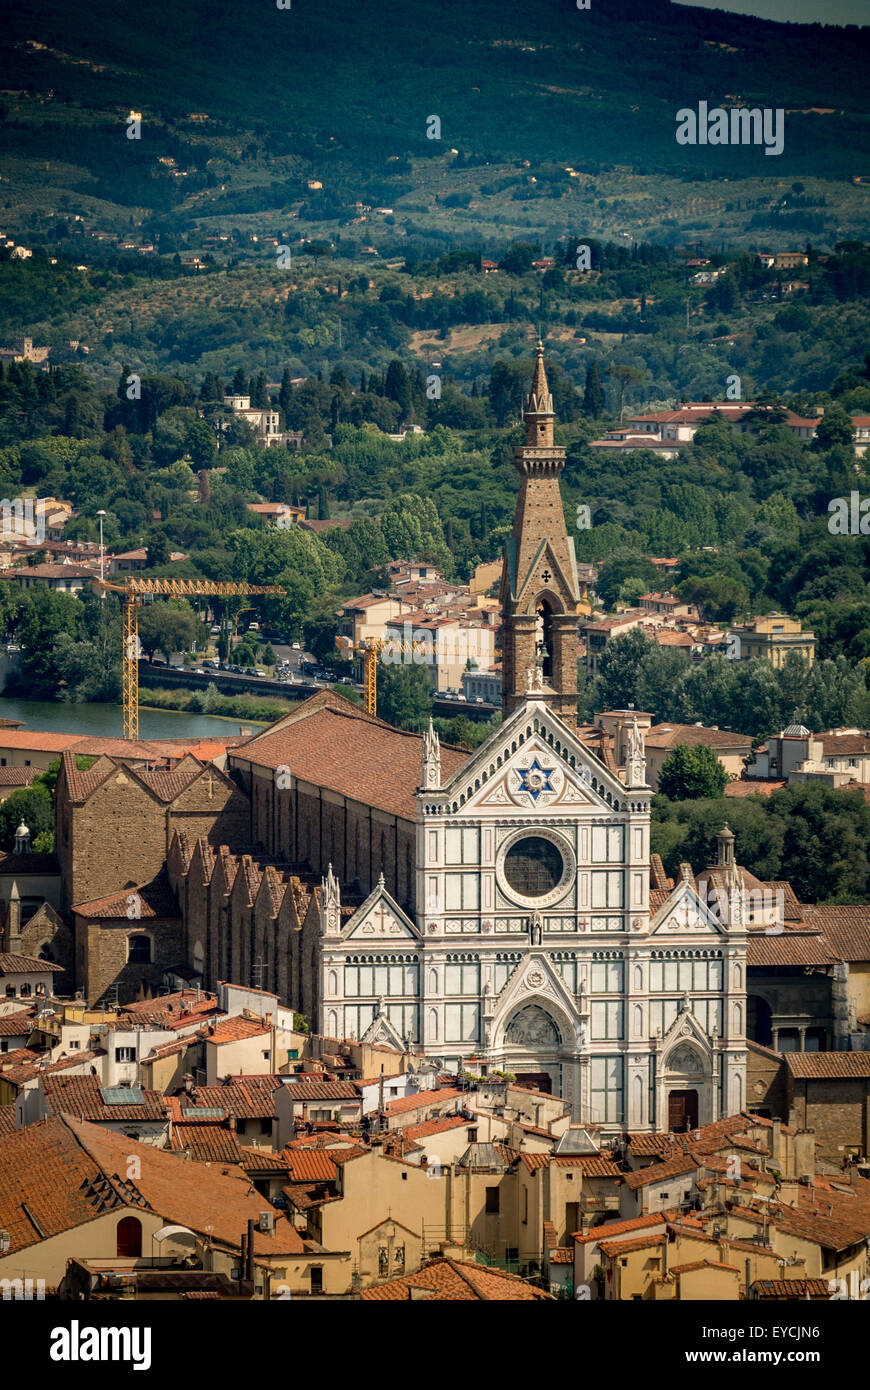 Basilica of Santa Croce, Florence, Italy. Buried place of Michelangelo and Galileo. Stock Photo